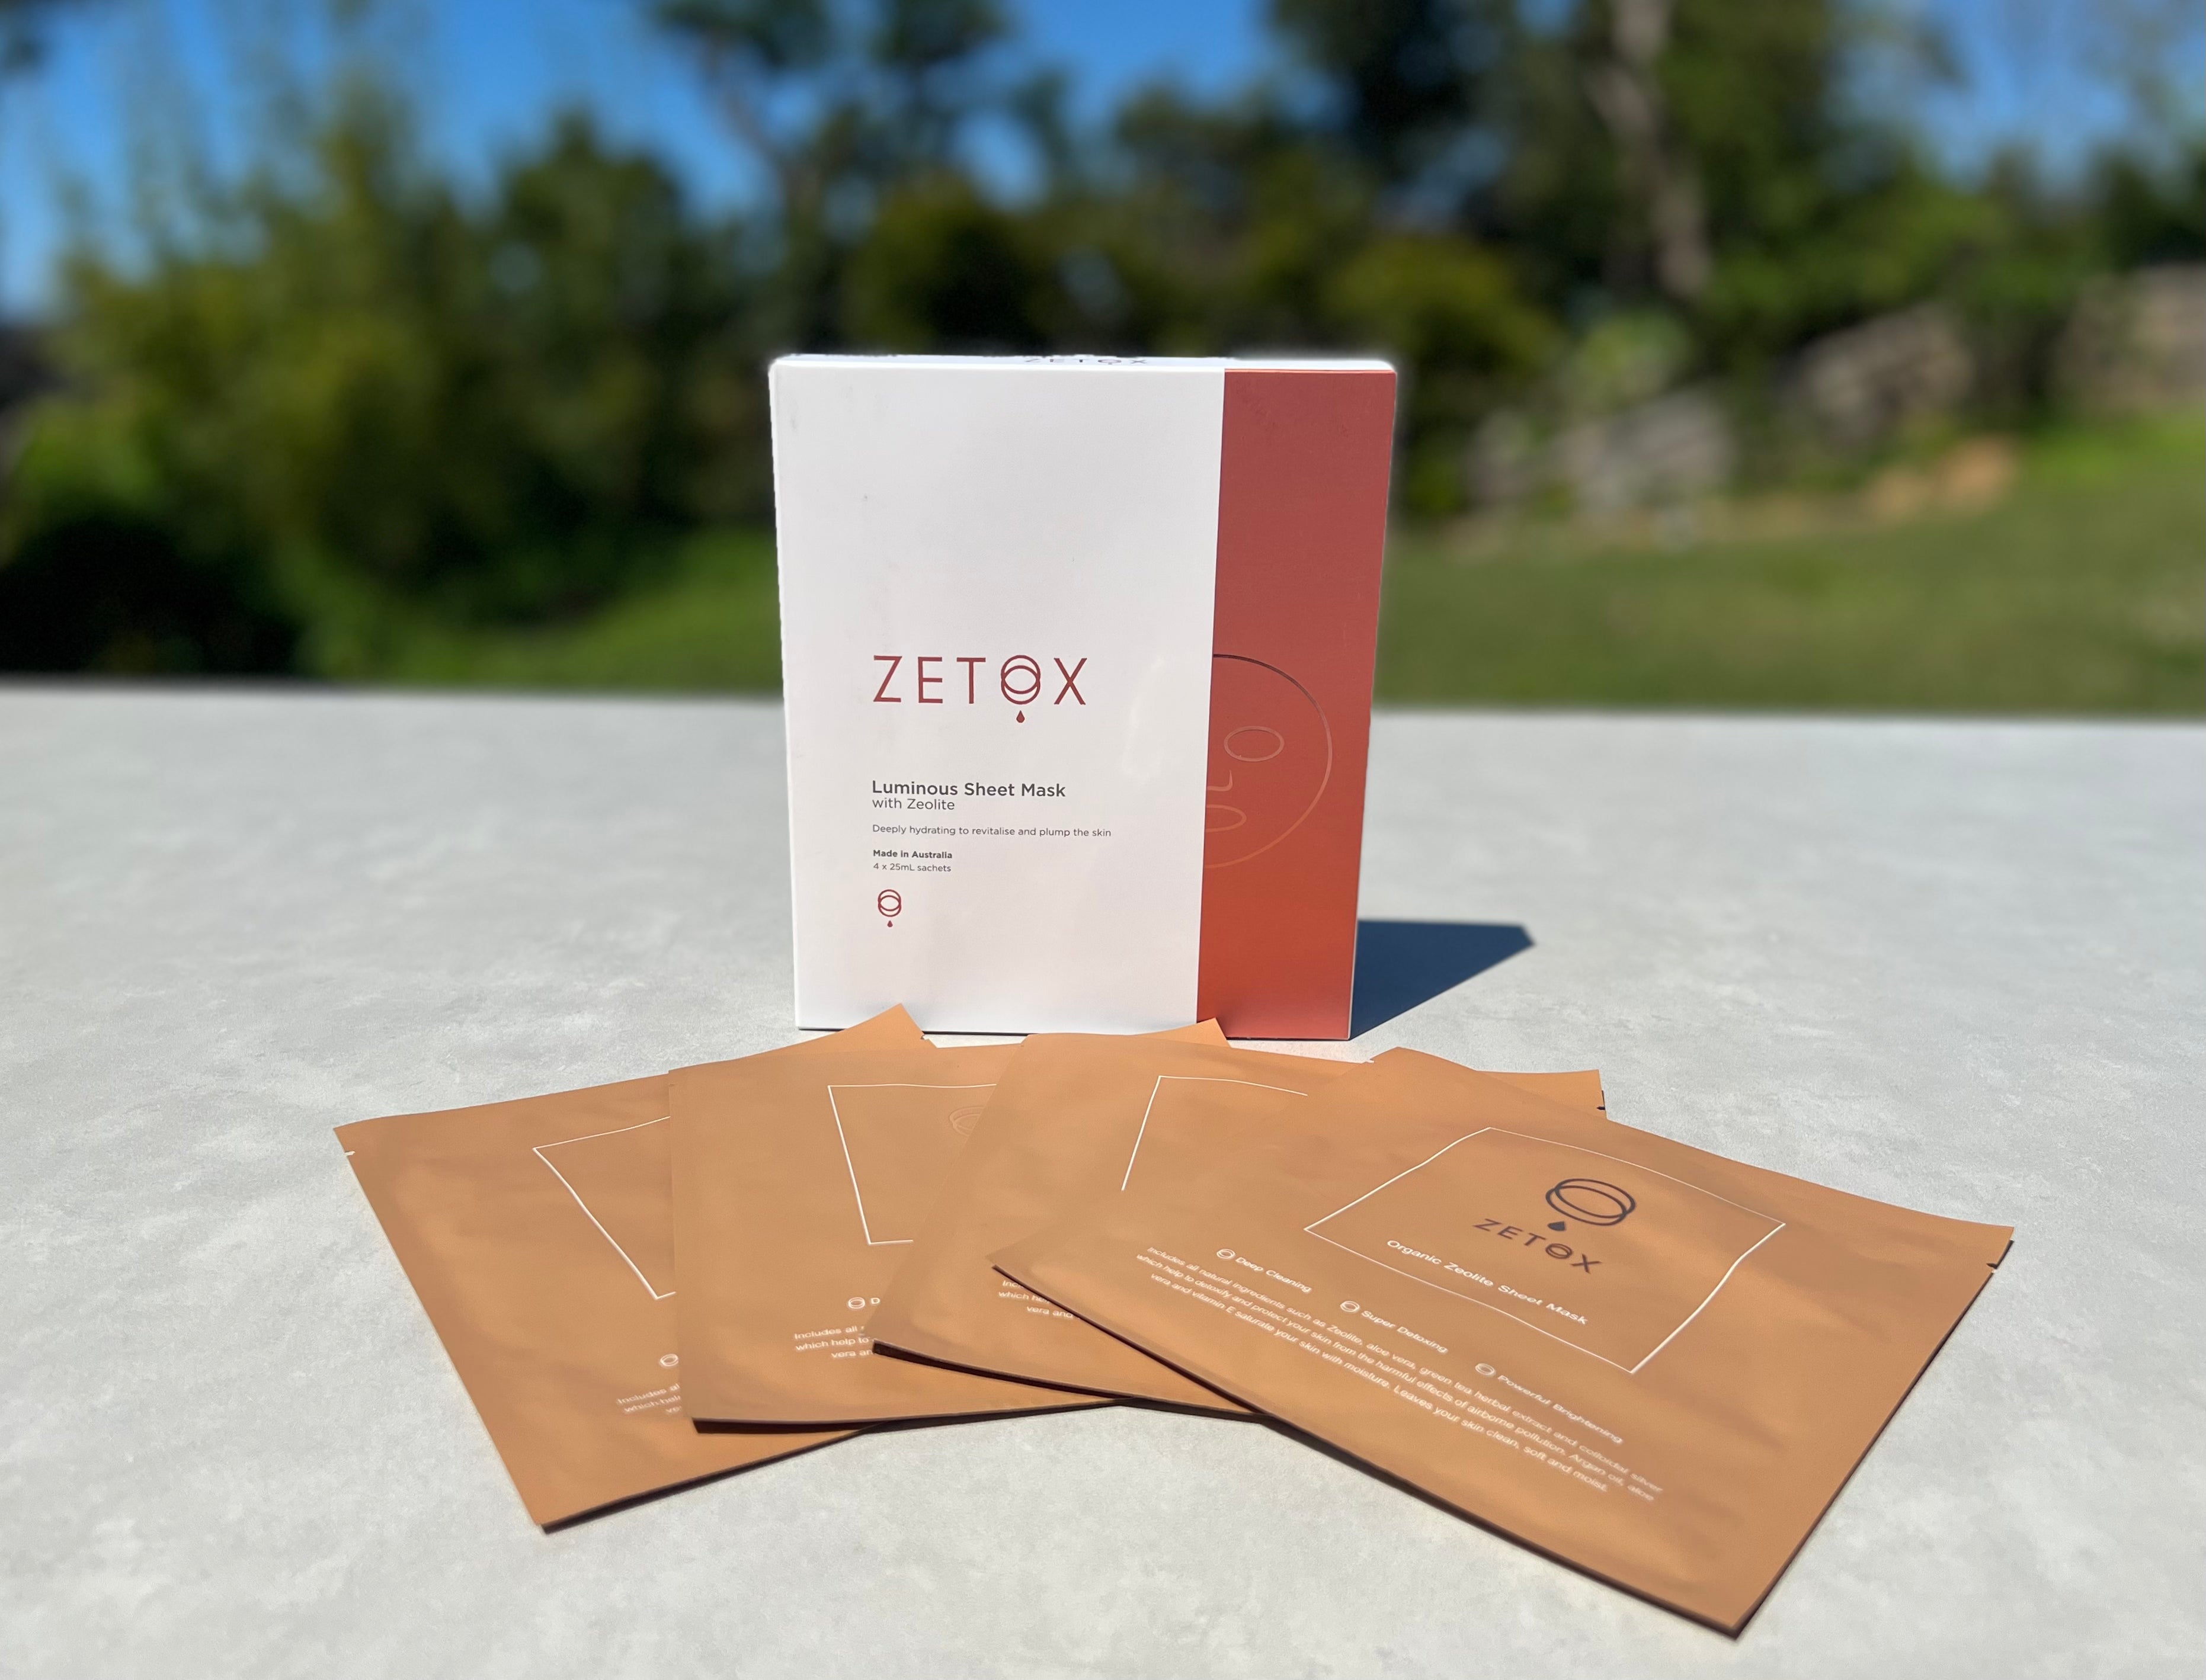 Zetox Luminous Sheet Mask 4 piece box set Special at $19.99(Was $39.99) while stock last